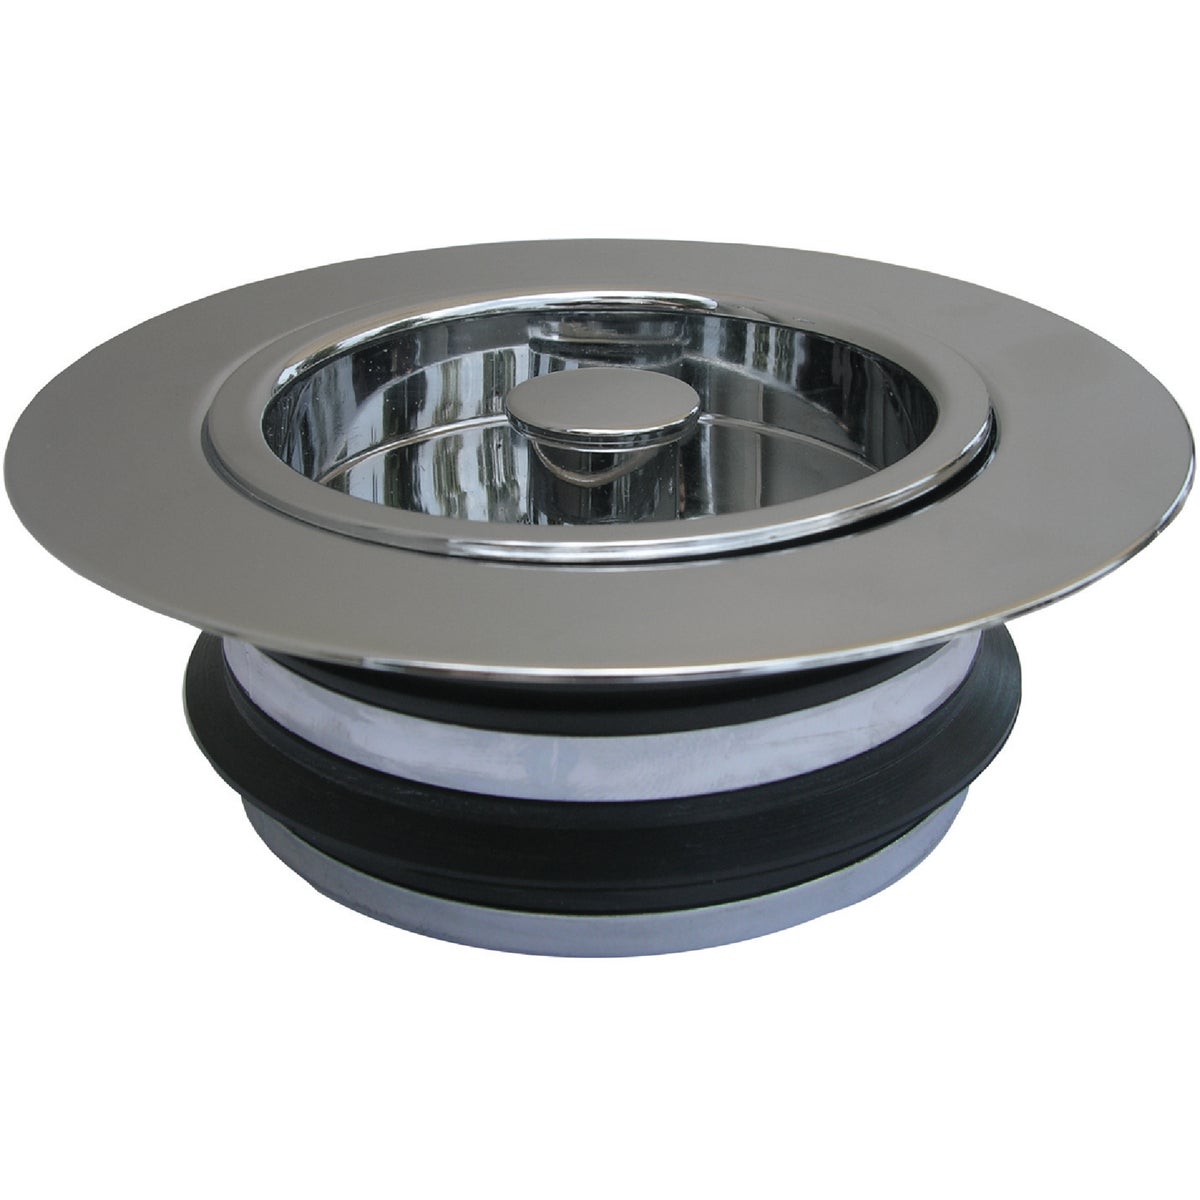 Lasco Chrome-Plated PVC Disposer Flange and Stopper